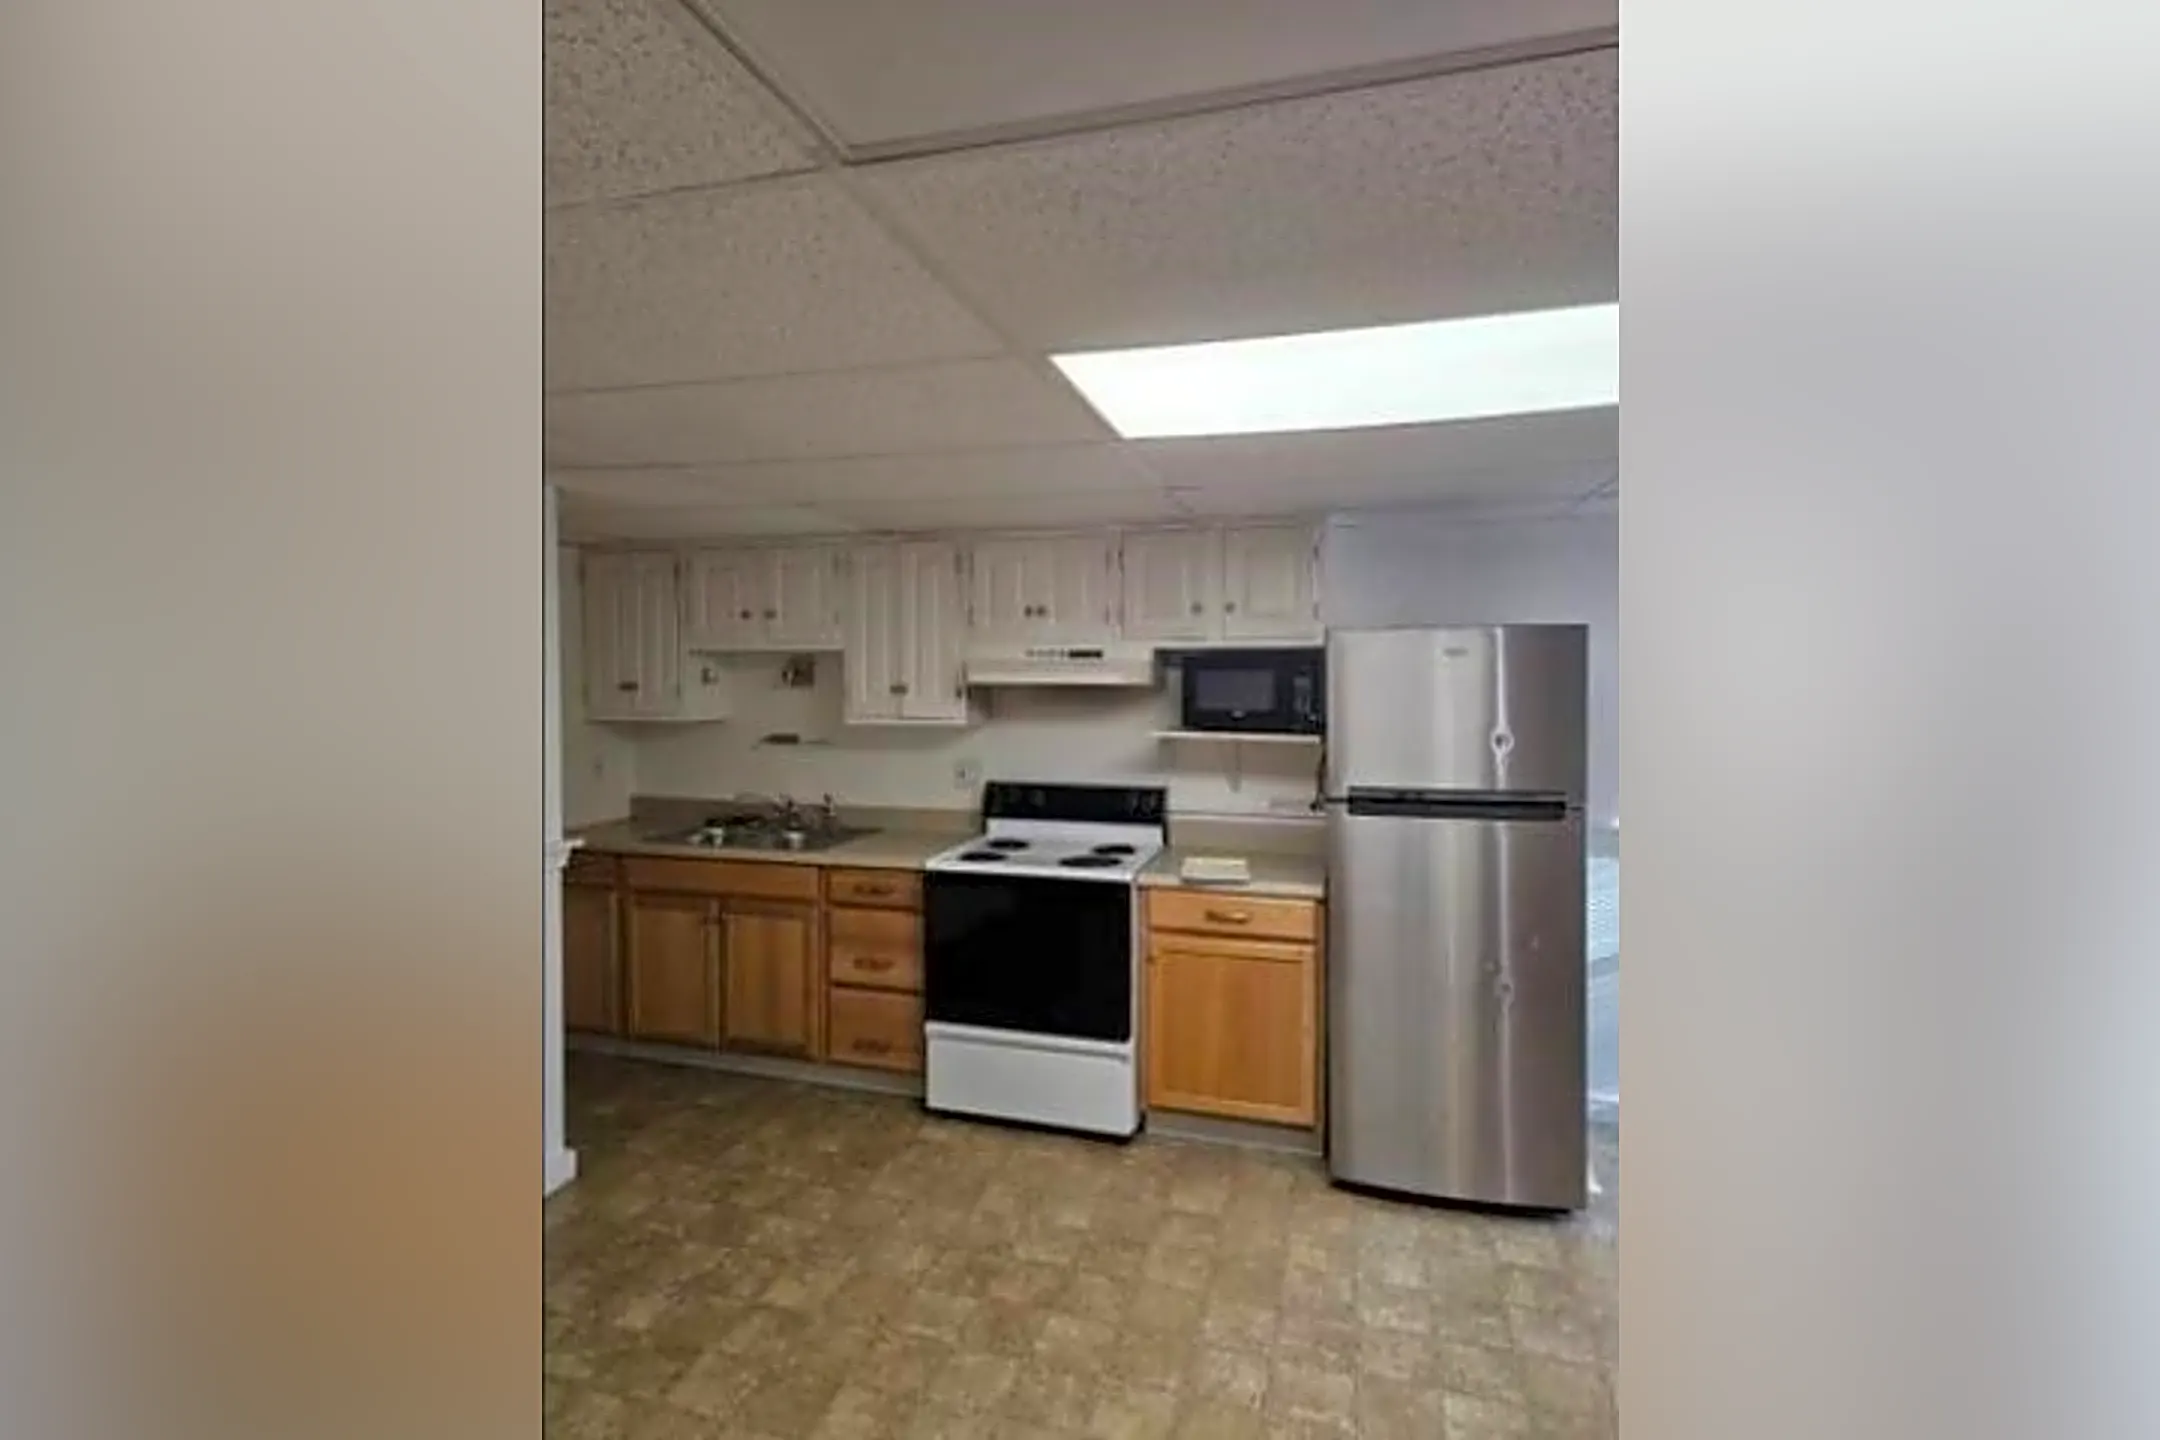 Kitchen - 95 Tolend Rd #C - Dover, NH